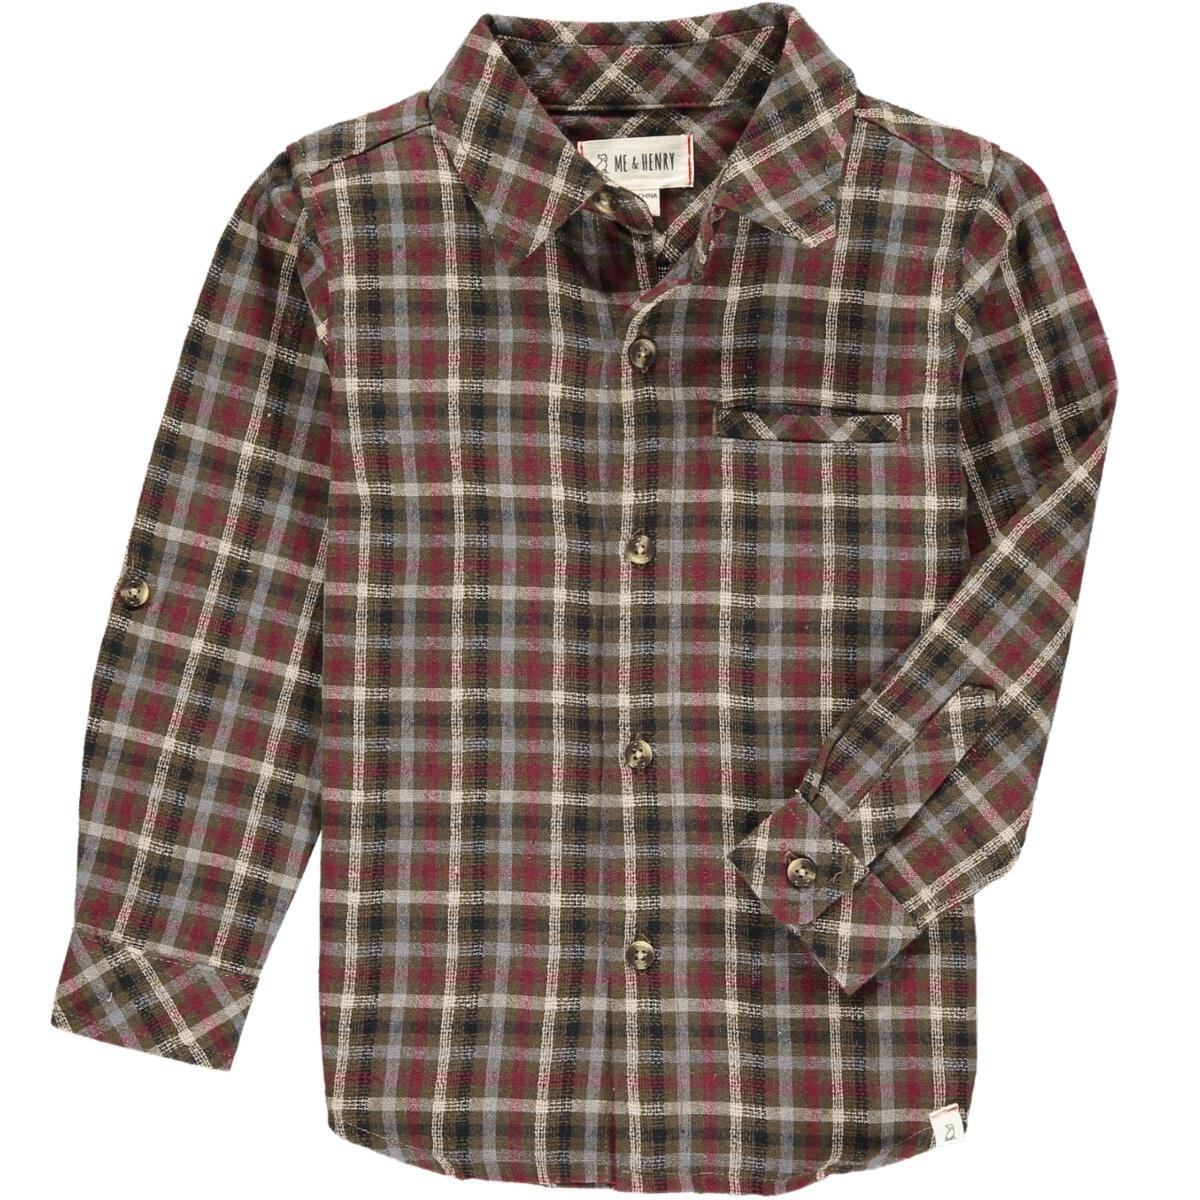 Me & Henry - Atwood Woven Shirt - Brown/Beige Plaid